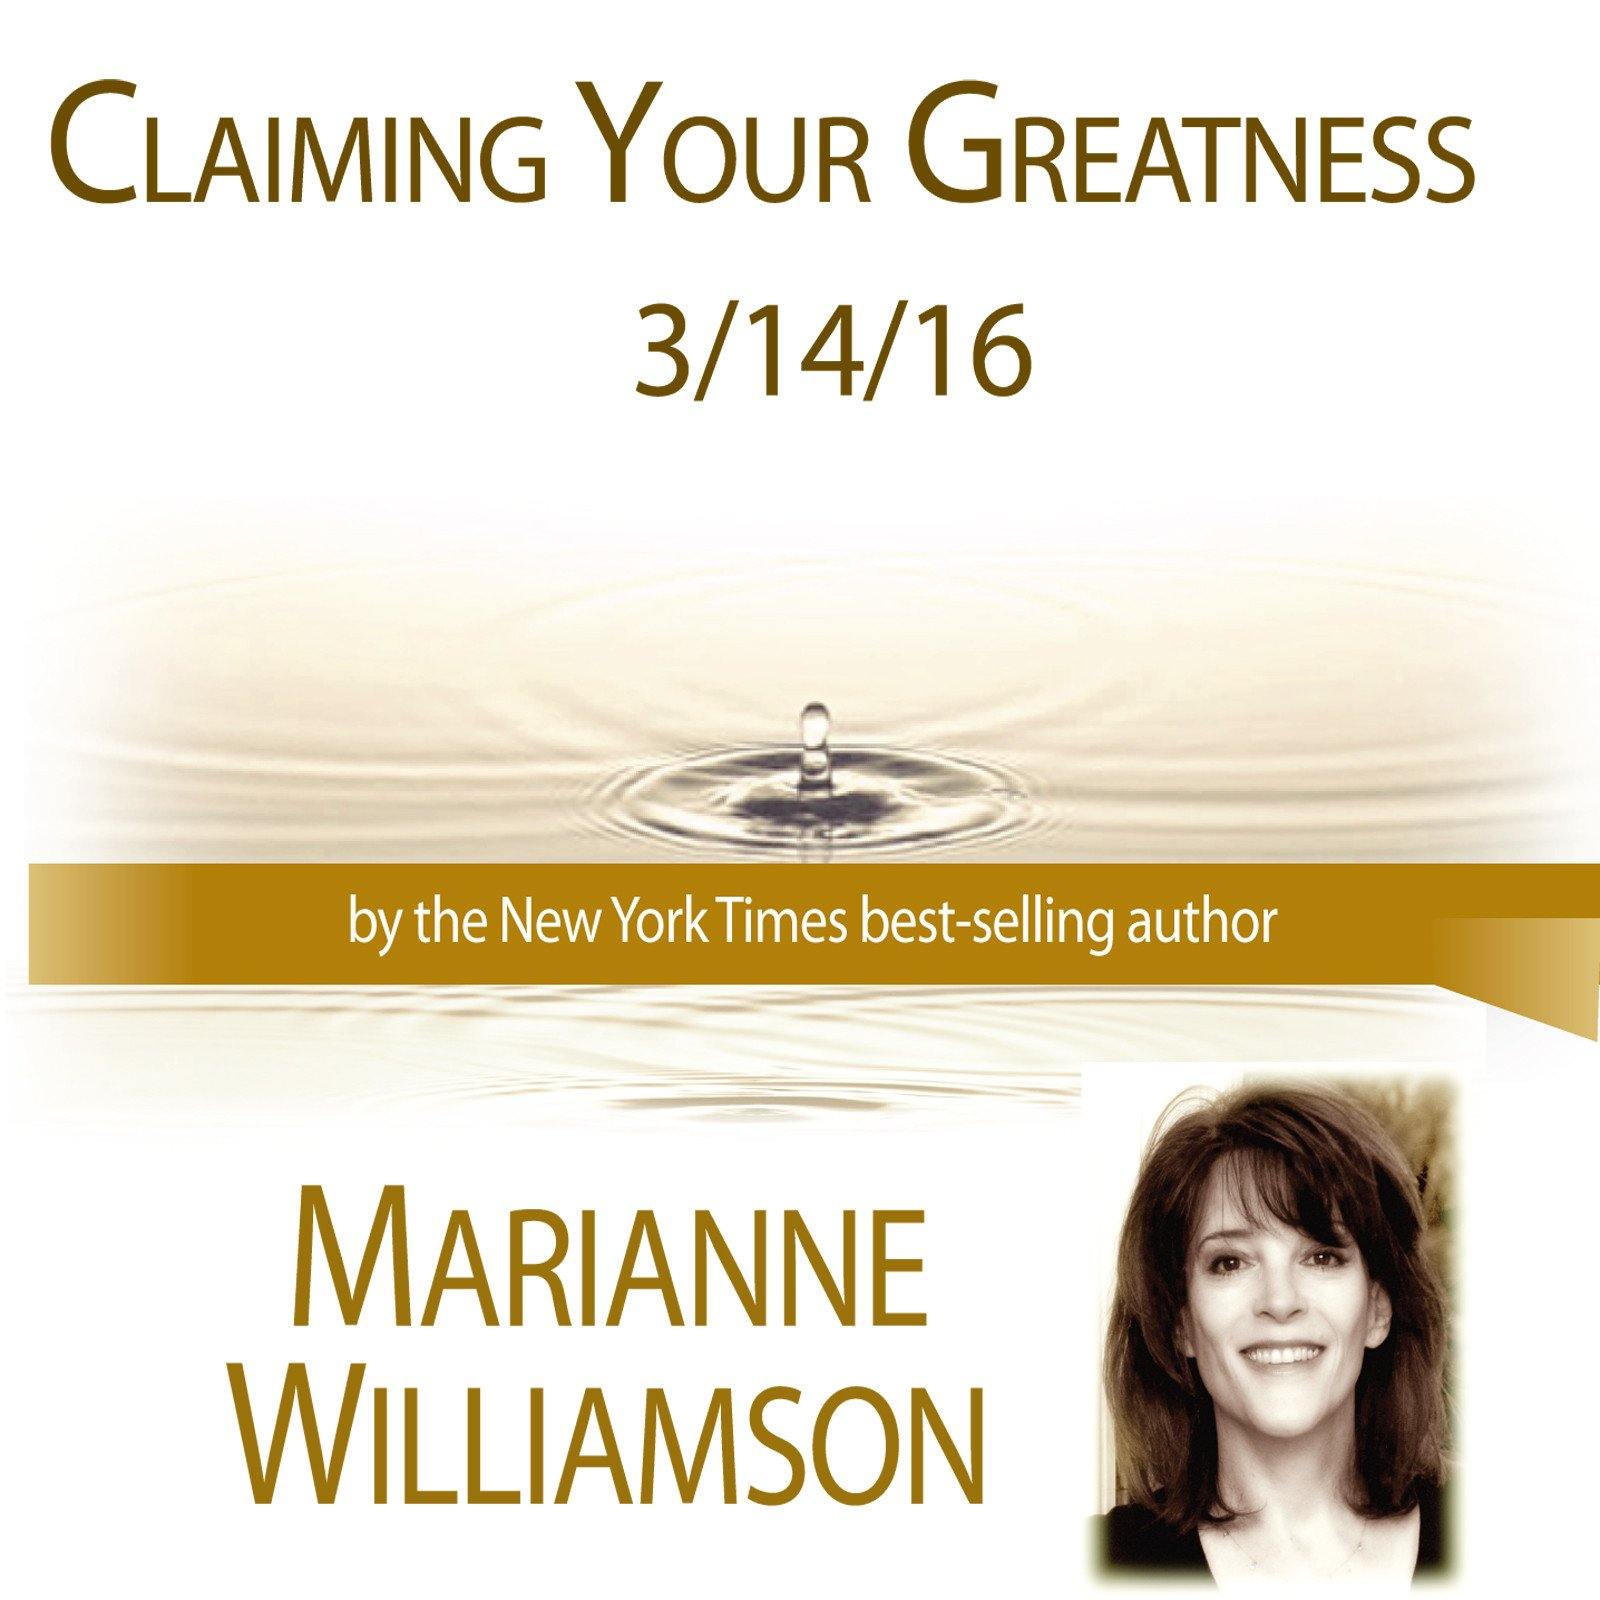 Claiming Your Greatness with Marianne Williamson Audio Program Marianne Williamson - BetterListen!